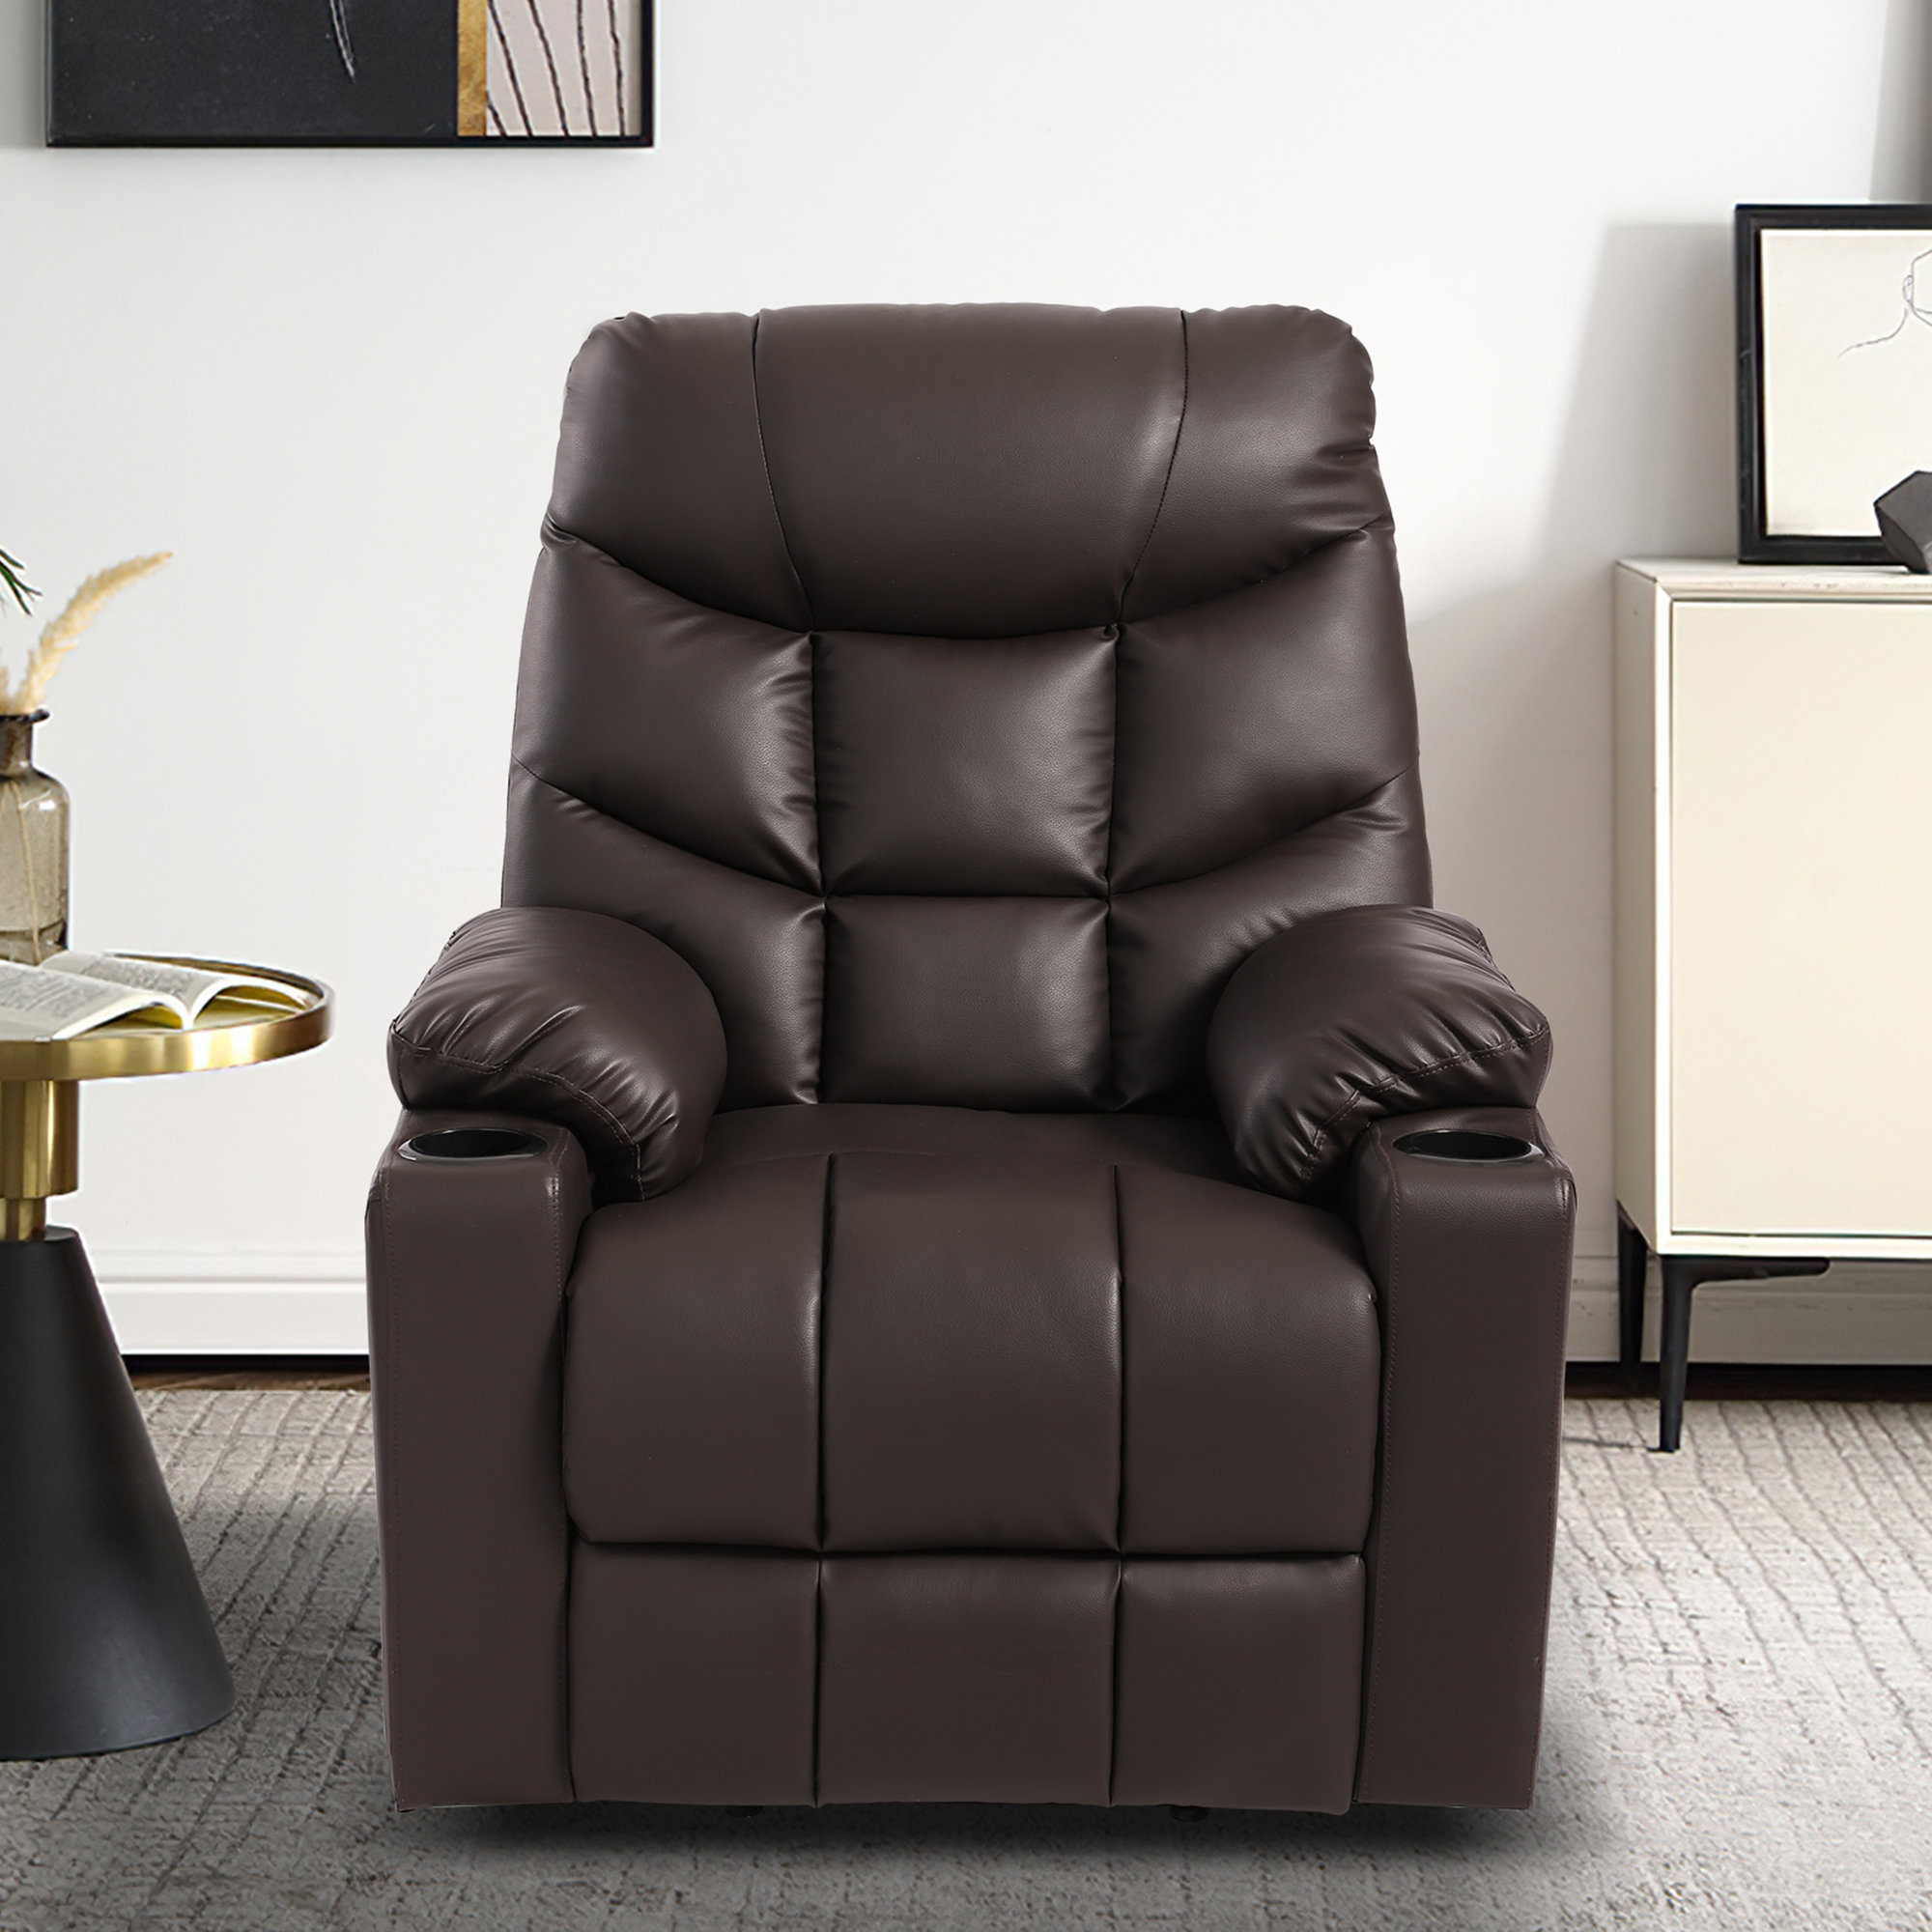 Vegan Leather Manual Swivel Rocker Glider Recliner Chair with Massage & Heat, Lumbar Pillow Included Ebern Designs Leather Type: Brown Faux Leather